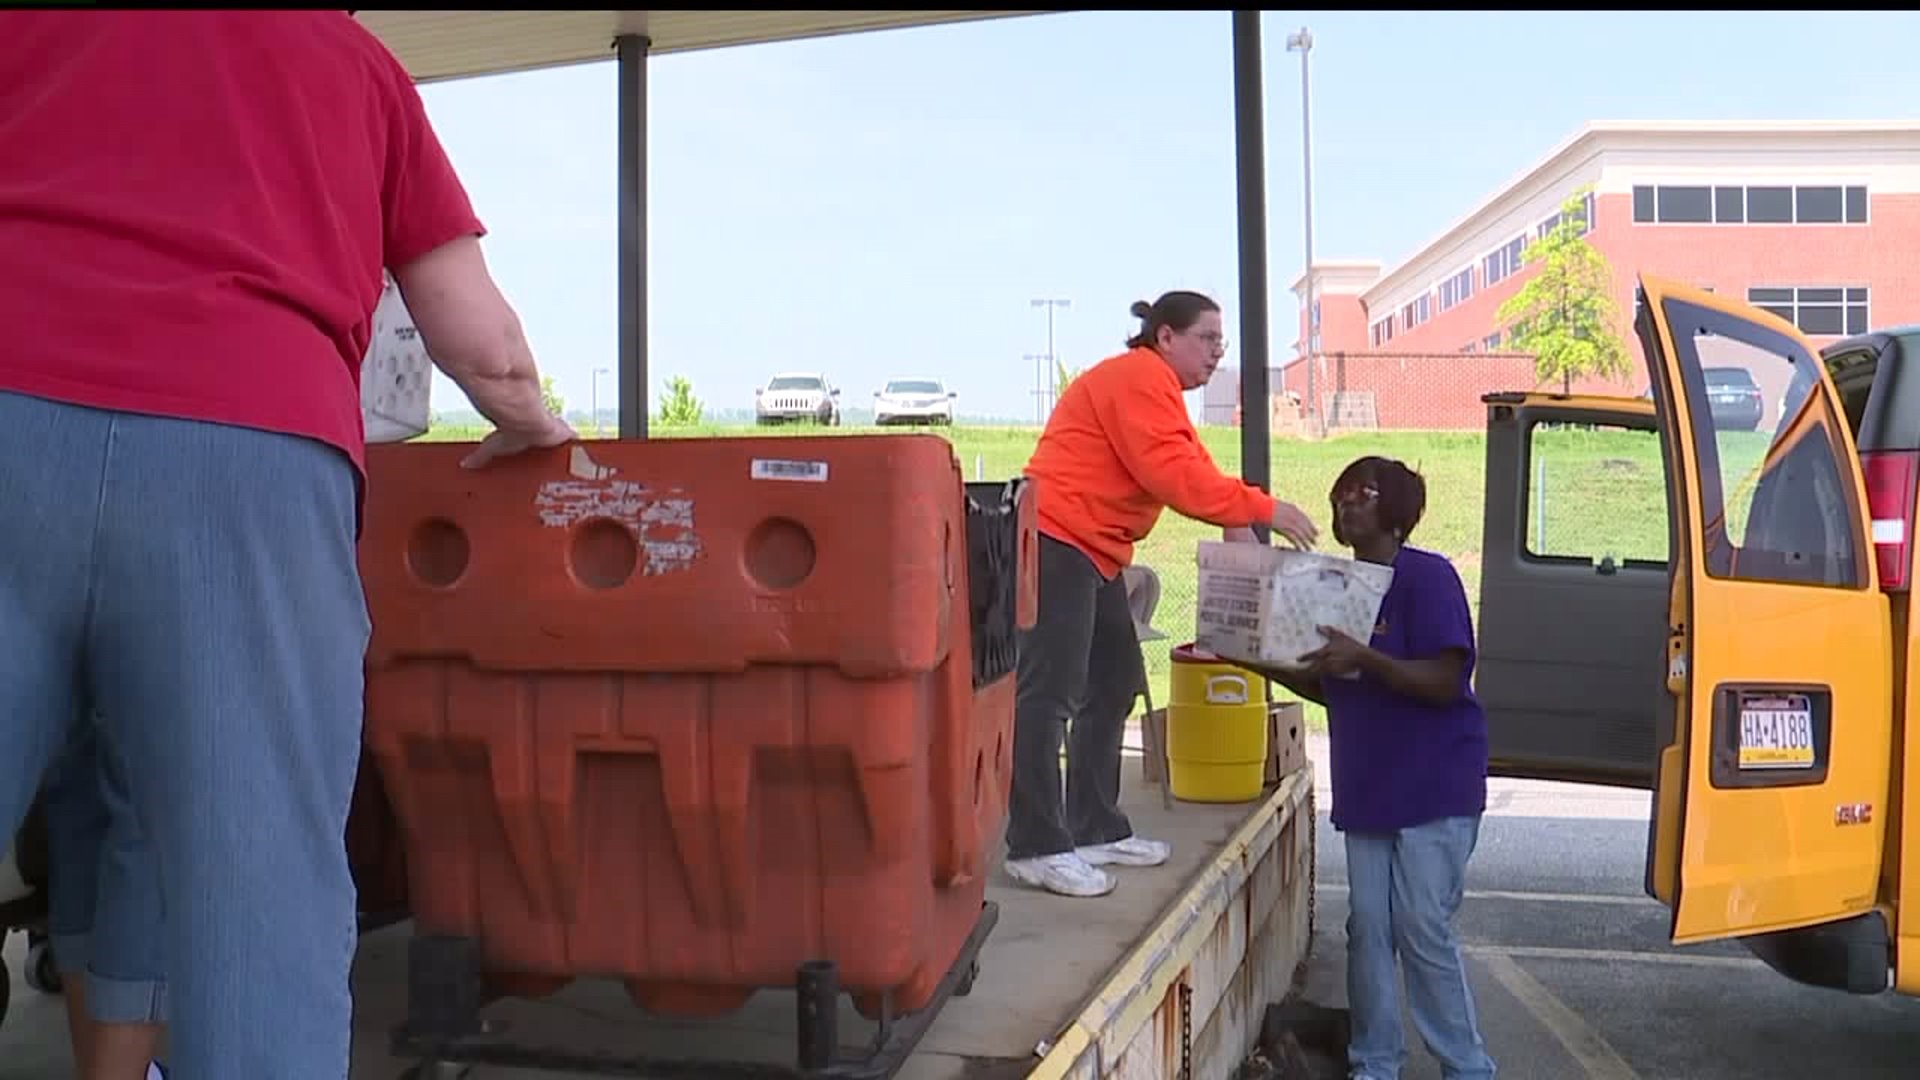 U.S.P.S hosts 26th Annual Stamp Out Hunger Food Drive